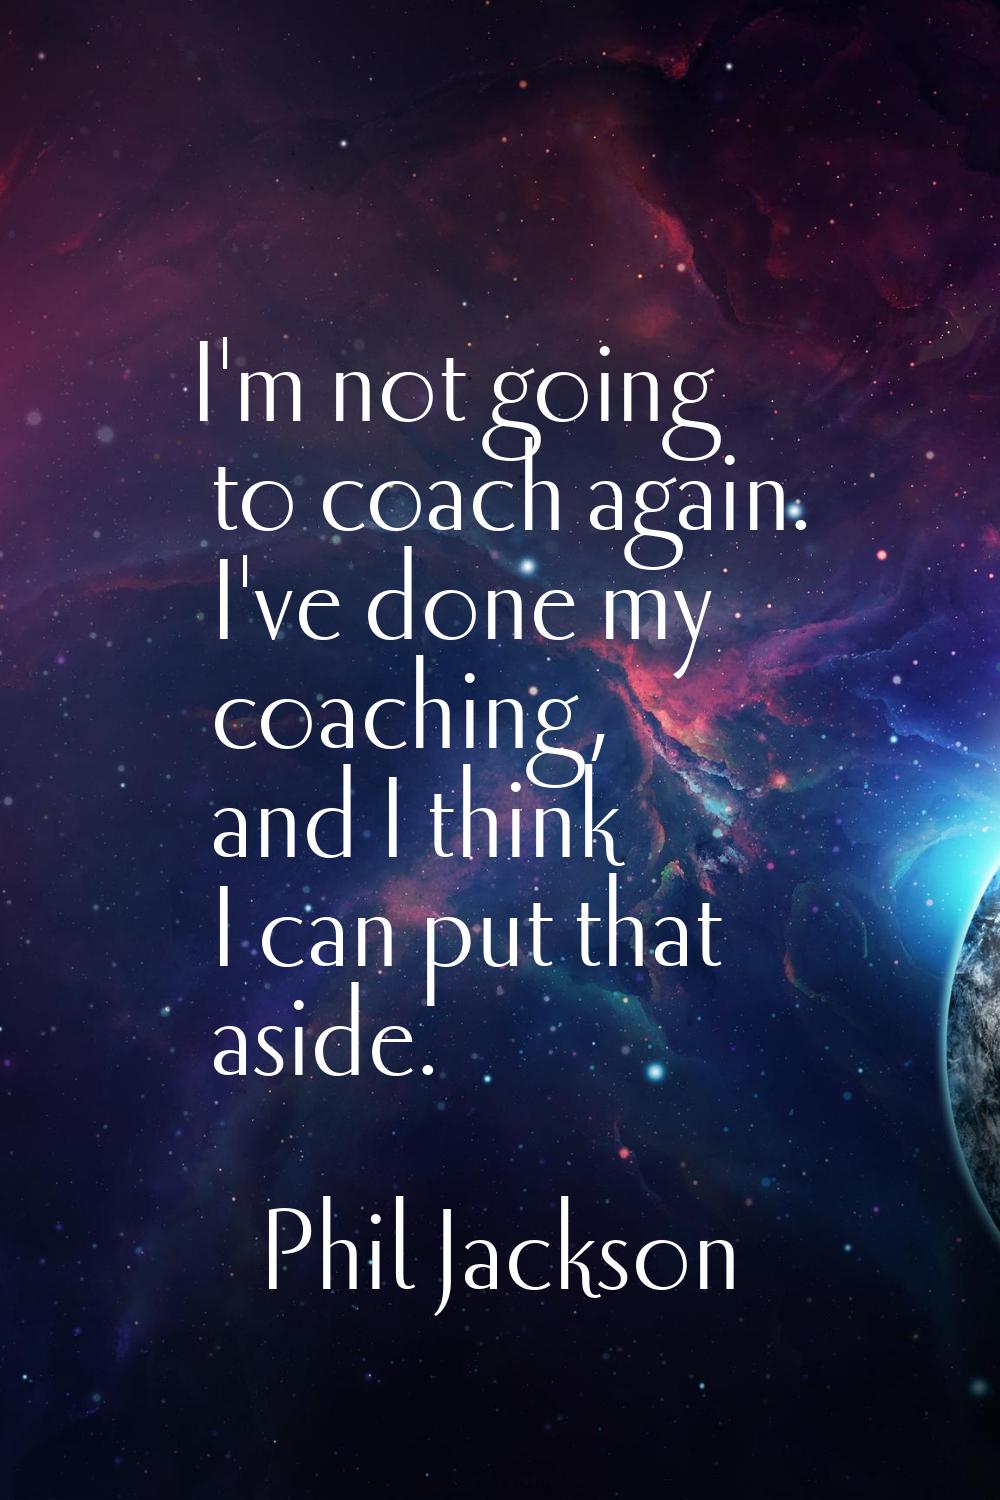 I'm not going to coach again. I've done my coaching, and I think I can put that aside.